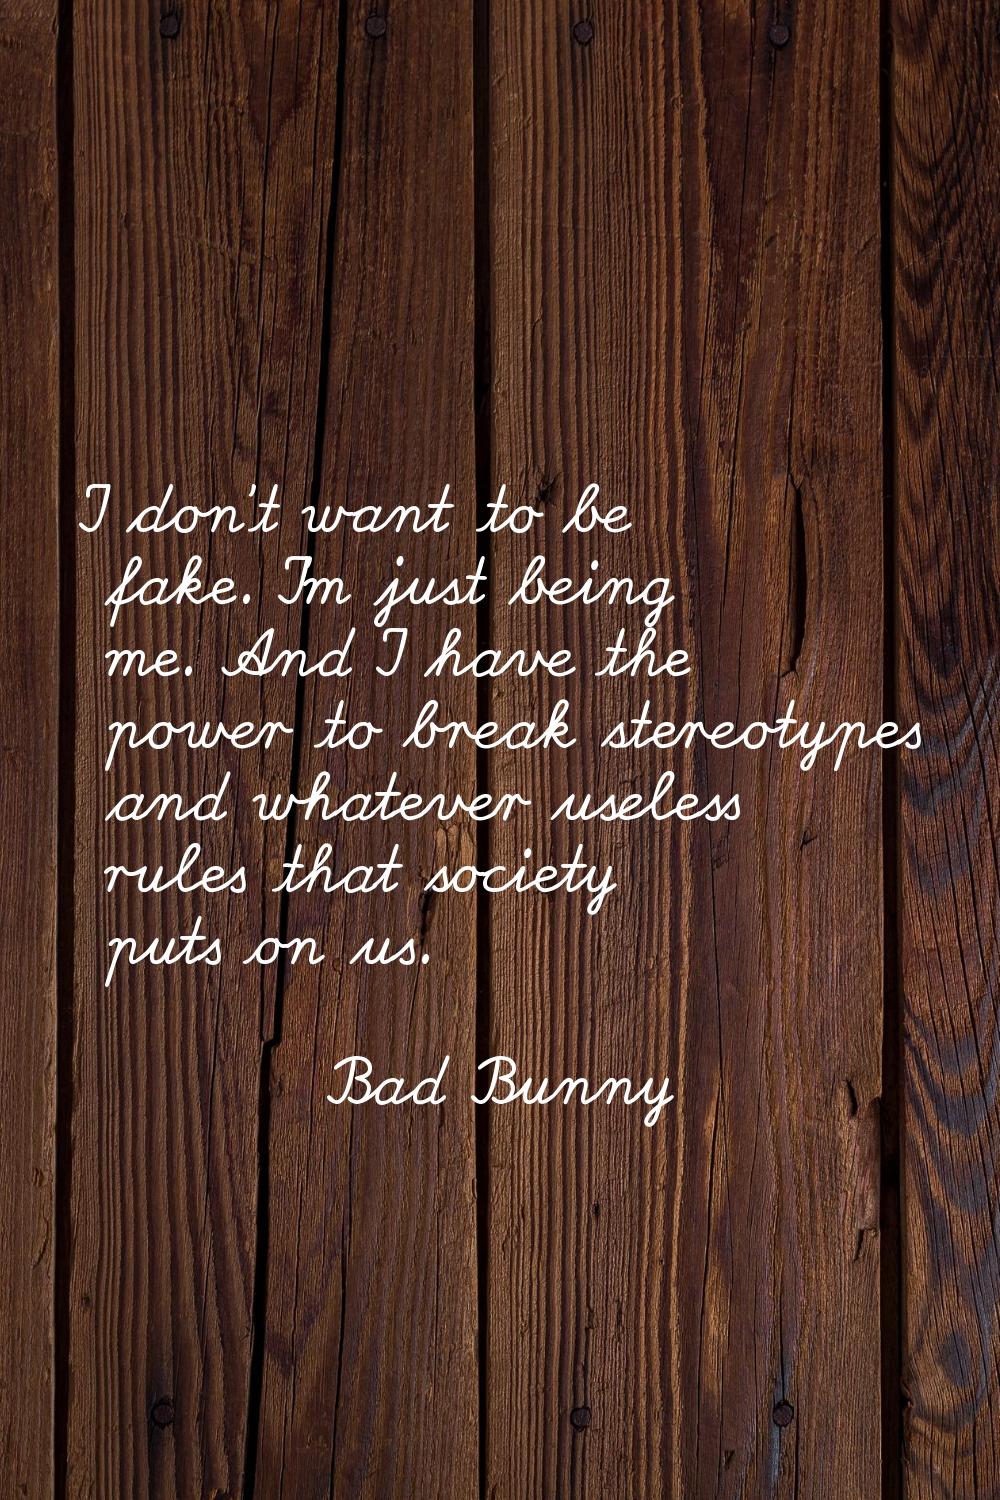 I don't want to be fake. I'm just being me. And I have the power to break stereotypes and whatever 